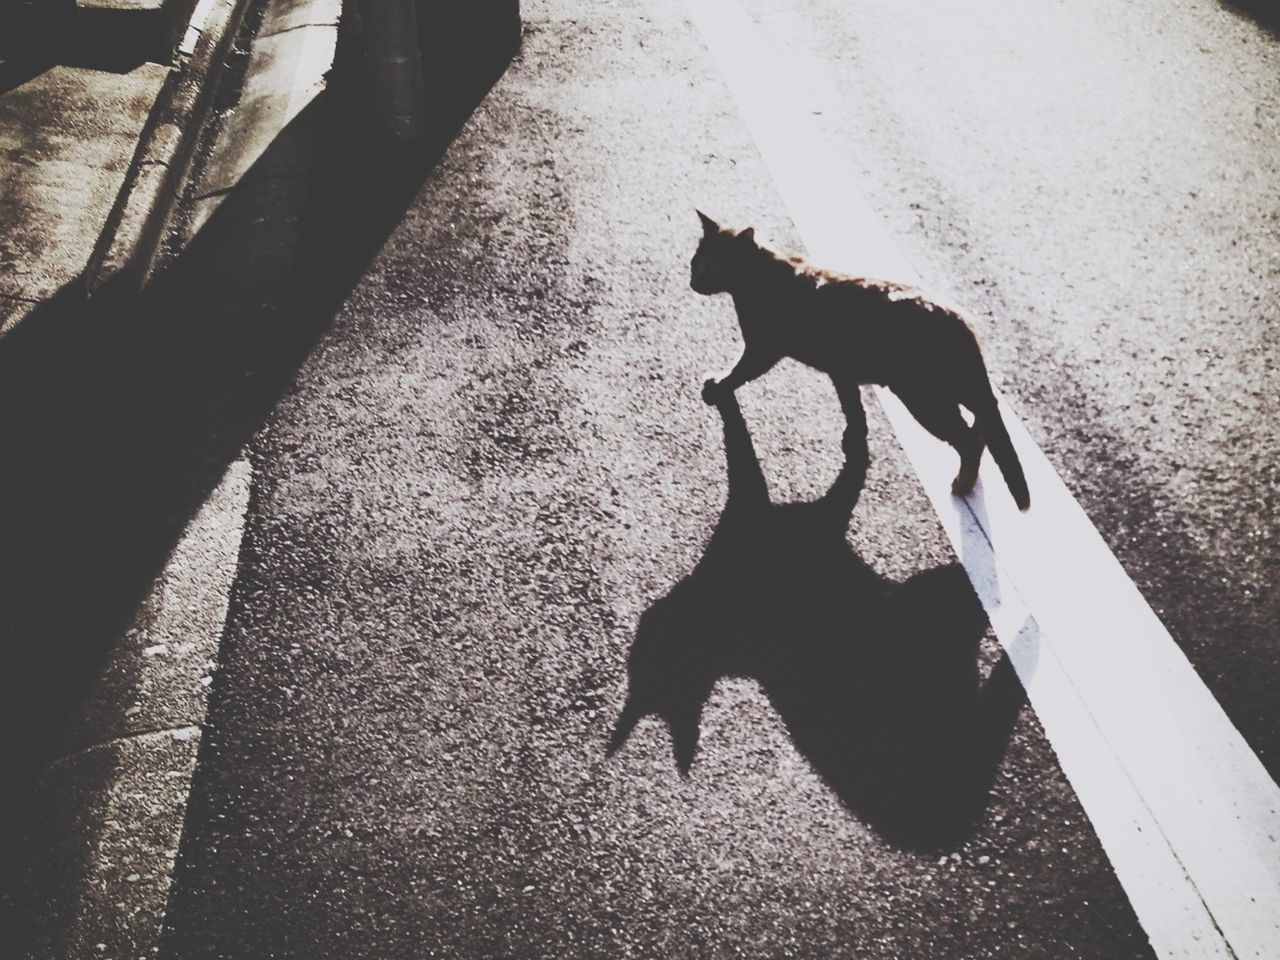 animal themes, domestic animals, one animal, pets, mammal, dog, high angle view, shadow, domestic cat, black color, sunlight, walking, street, cat, full length, standing, outdoors, day, vertebrate, side view